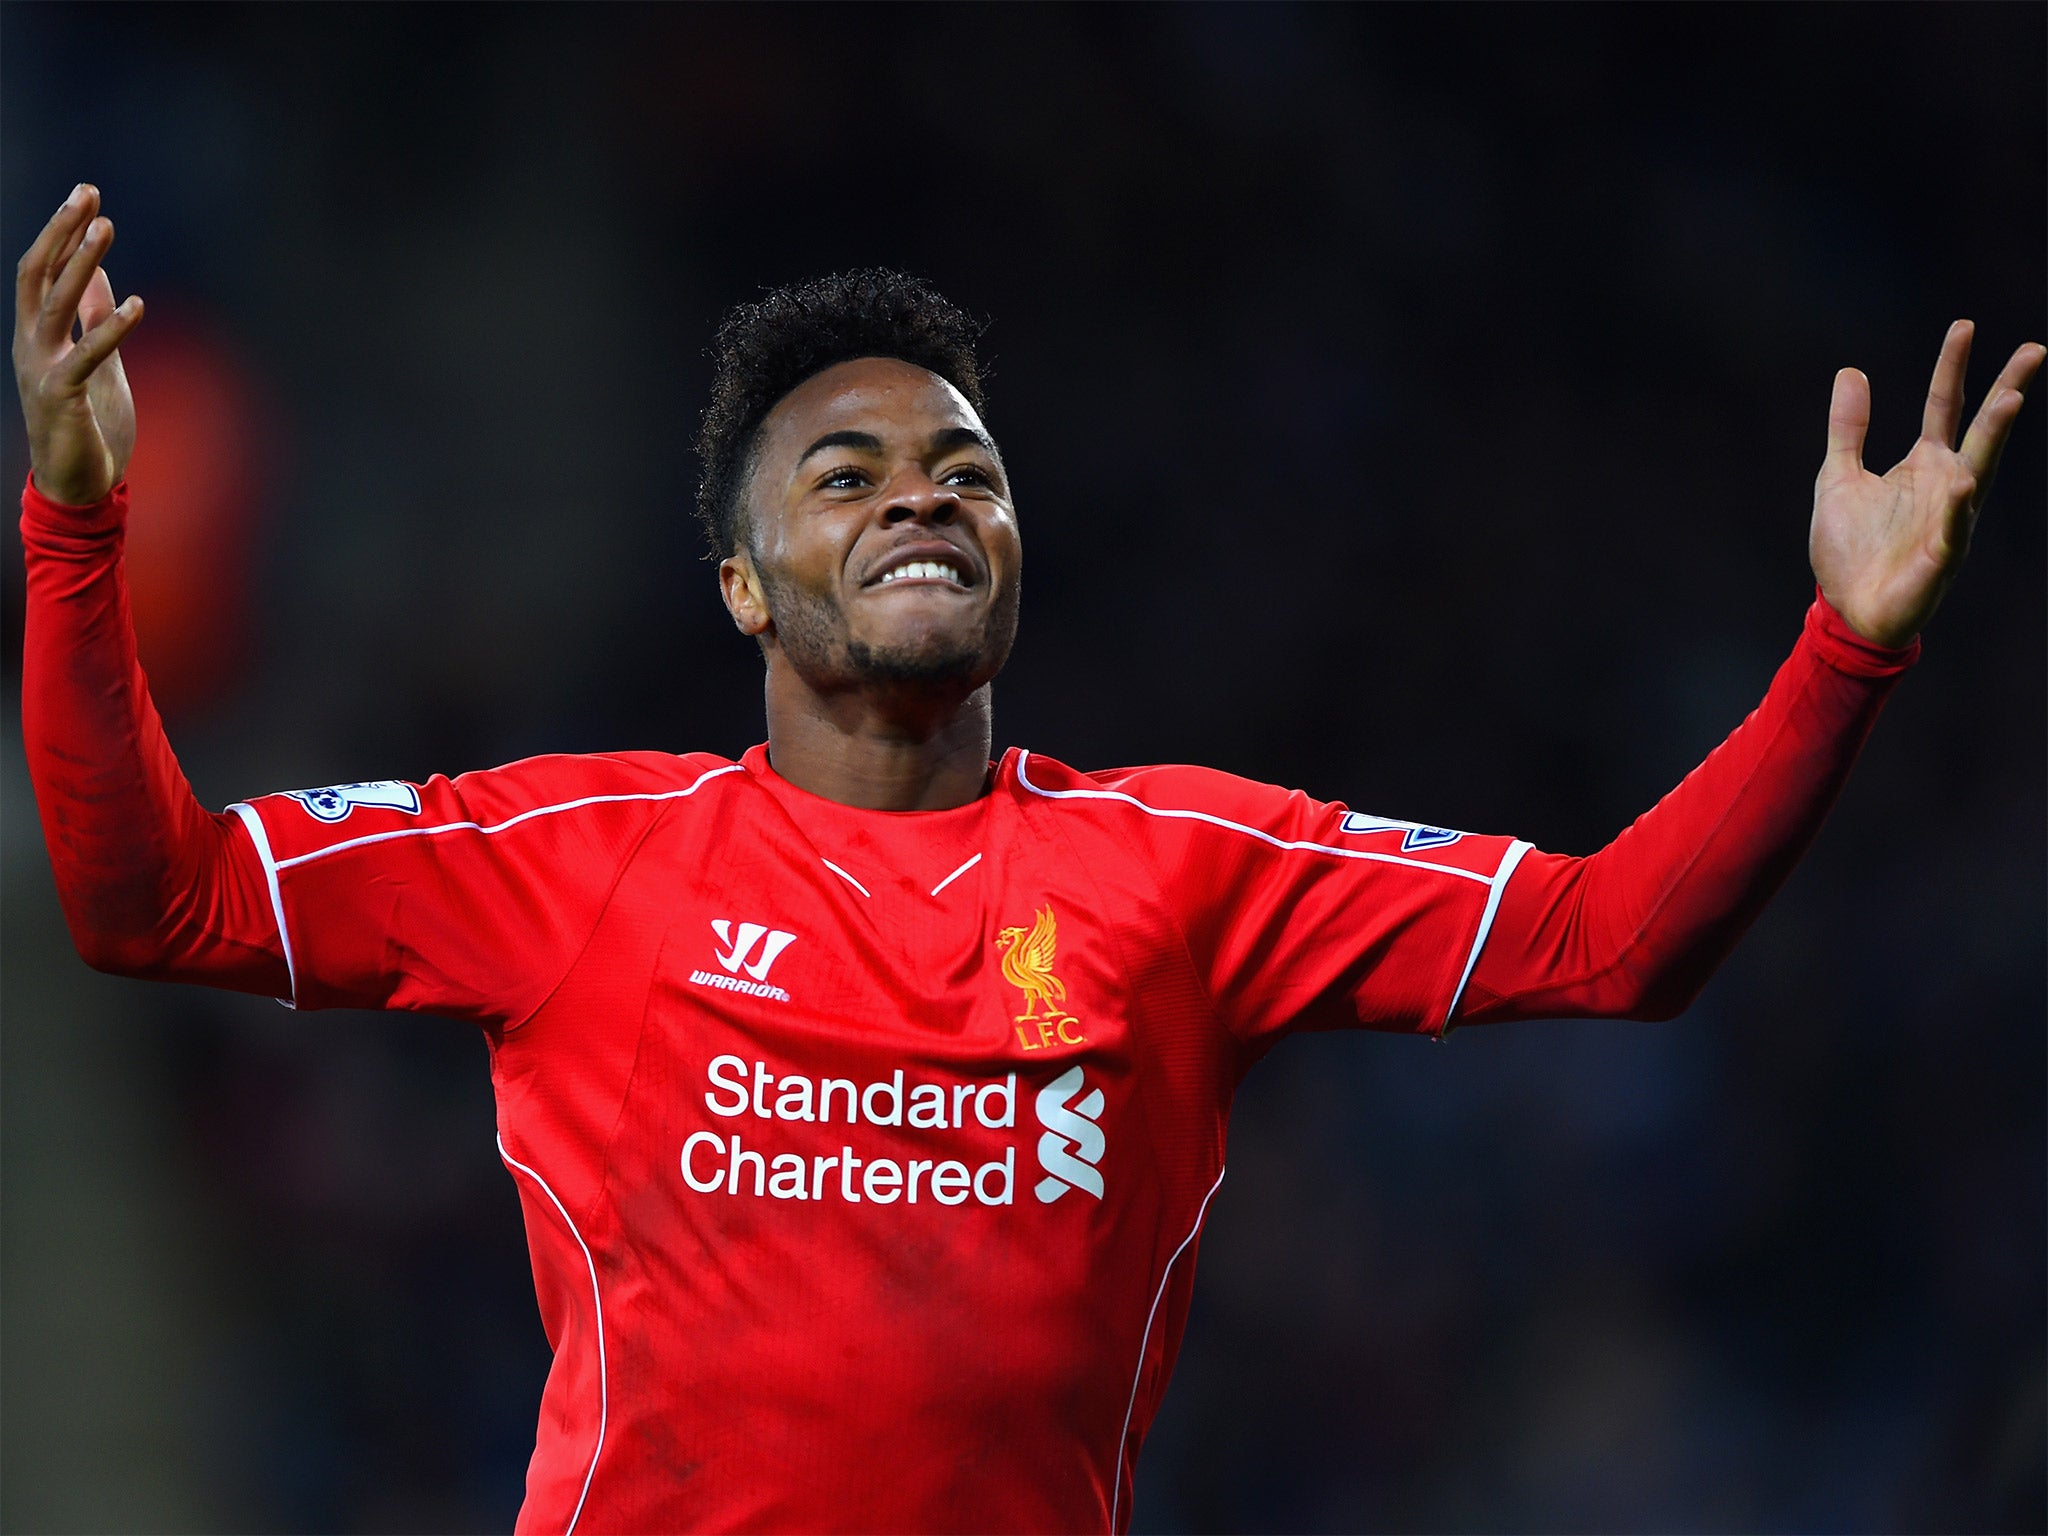 Raheem Sterling has been described as a ‘talisman’ by his manager